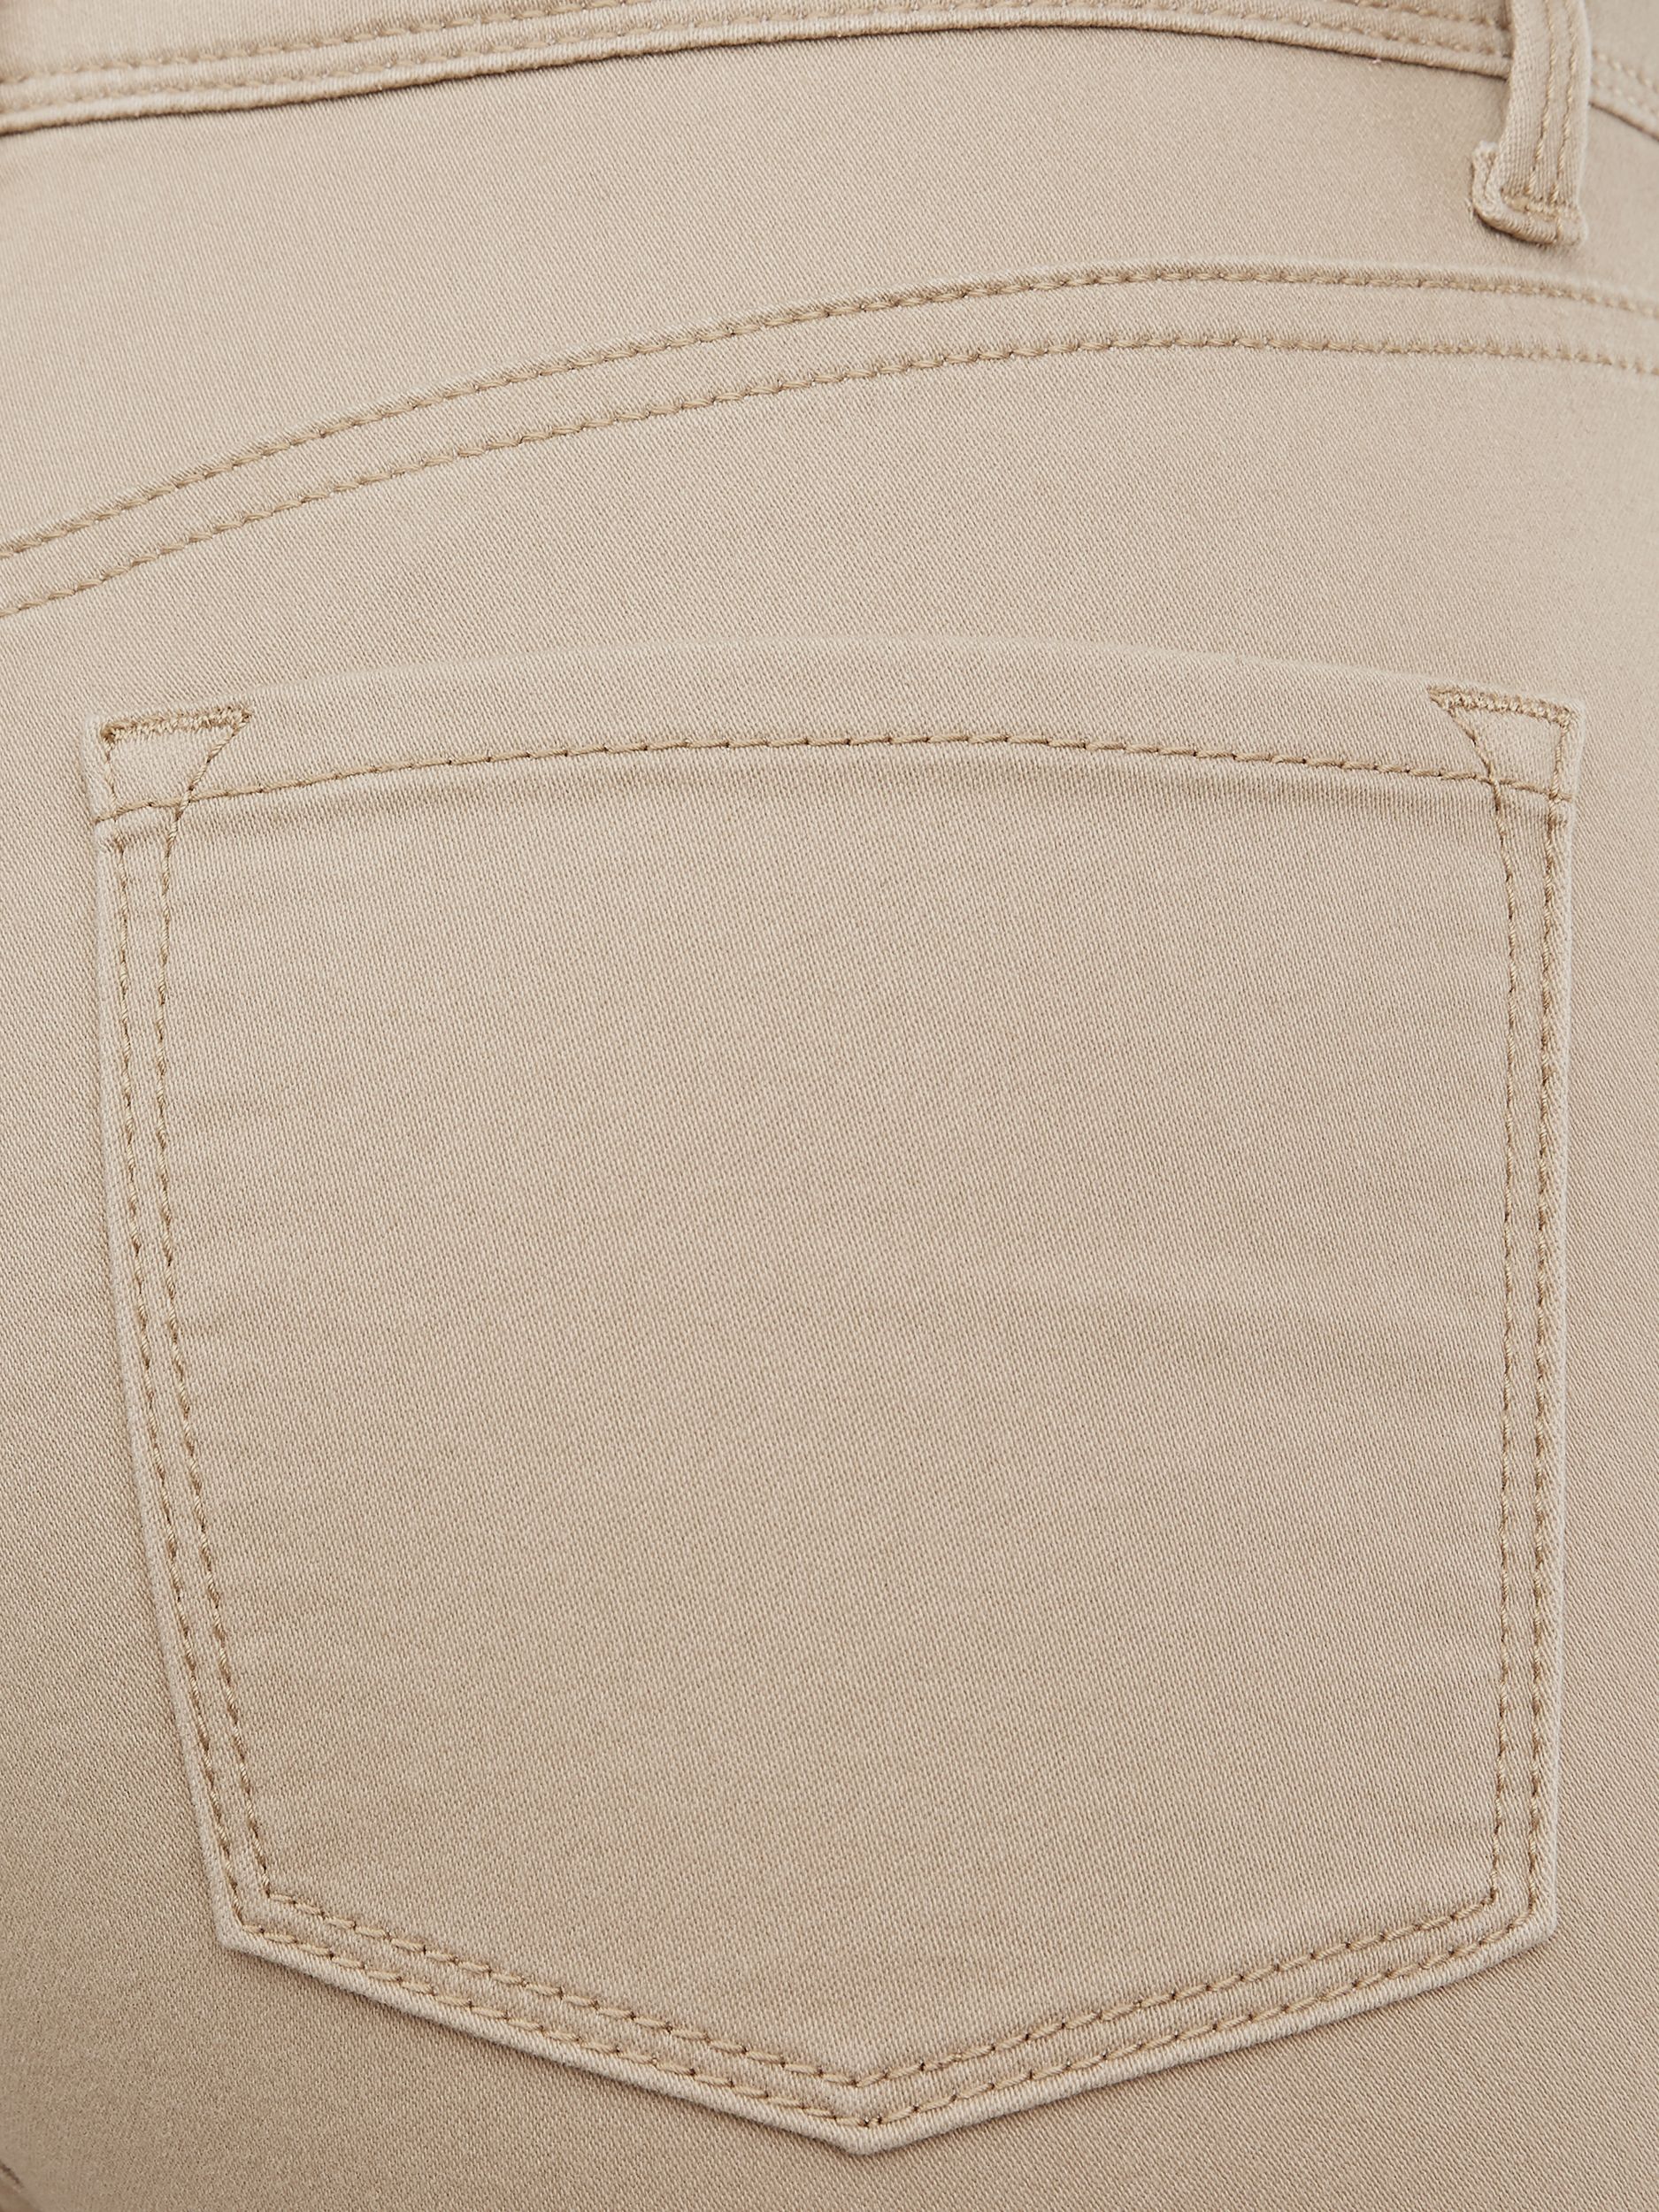 Time and Tru Women's High Rise Sculpted Jeggings - image 4 of 4